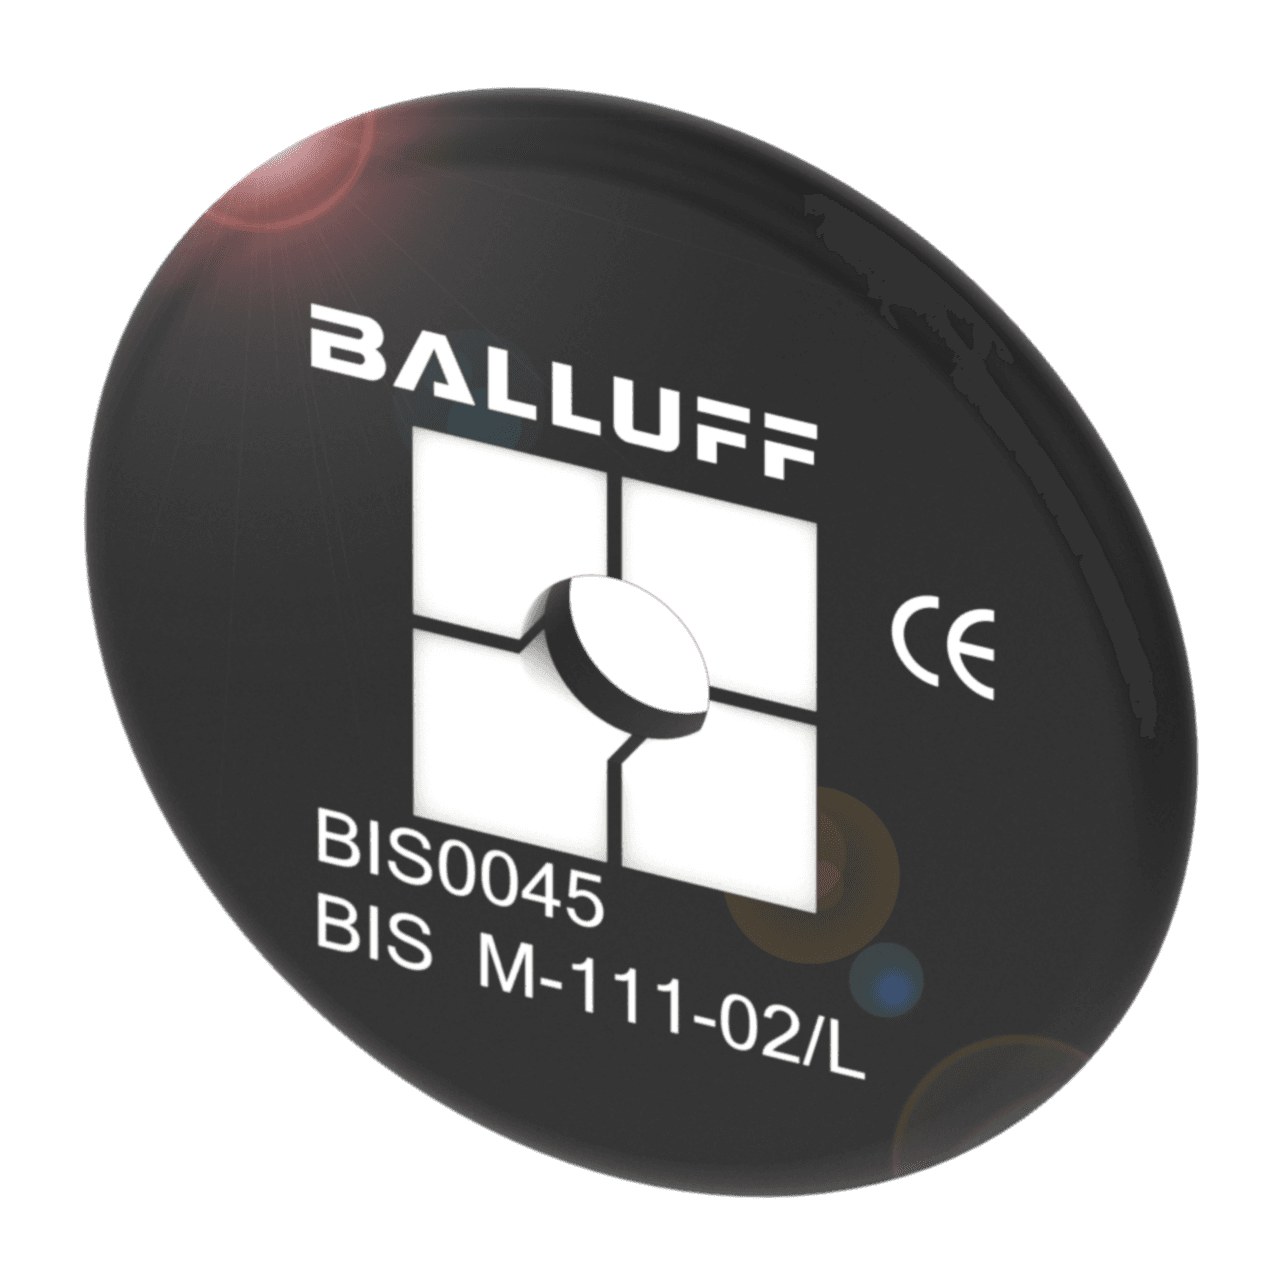 Balluff BIS0045 HF data carriers (13.56 MHz), Product Group: HF (13.56 MHz), Dimension: Ø 30 x 2.8 mm, Antenna type: round, UID serial number, read-only: 8 Byte, Memory type: FRAM, Supported data carrier types: DIN ISO 15693, User data, read/write: 2000 Byte